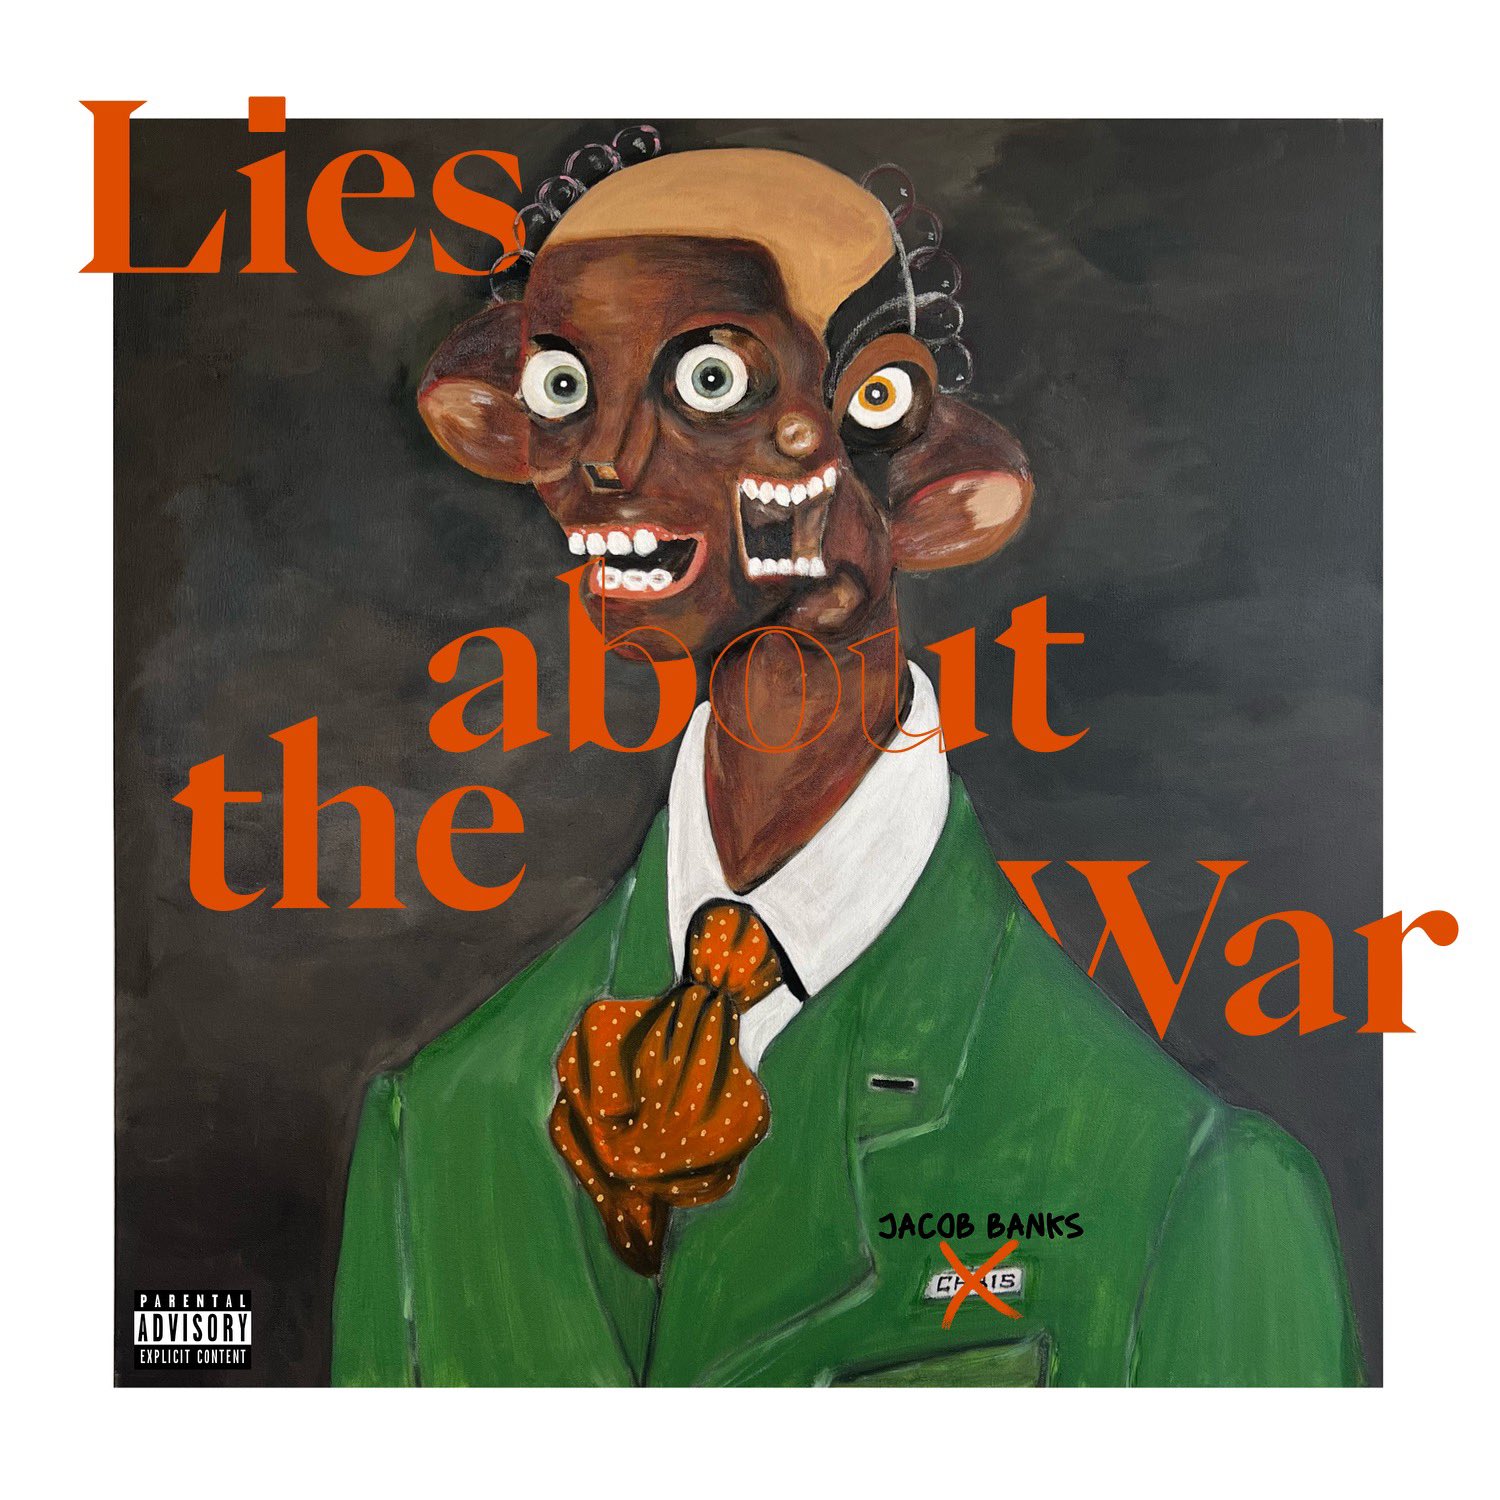 Jacob Banks - Lies About the War - Reviews - Album of The Year